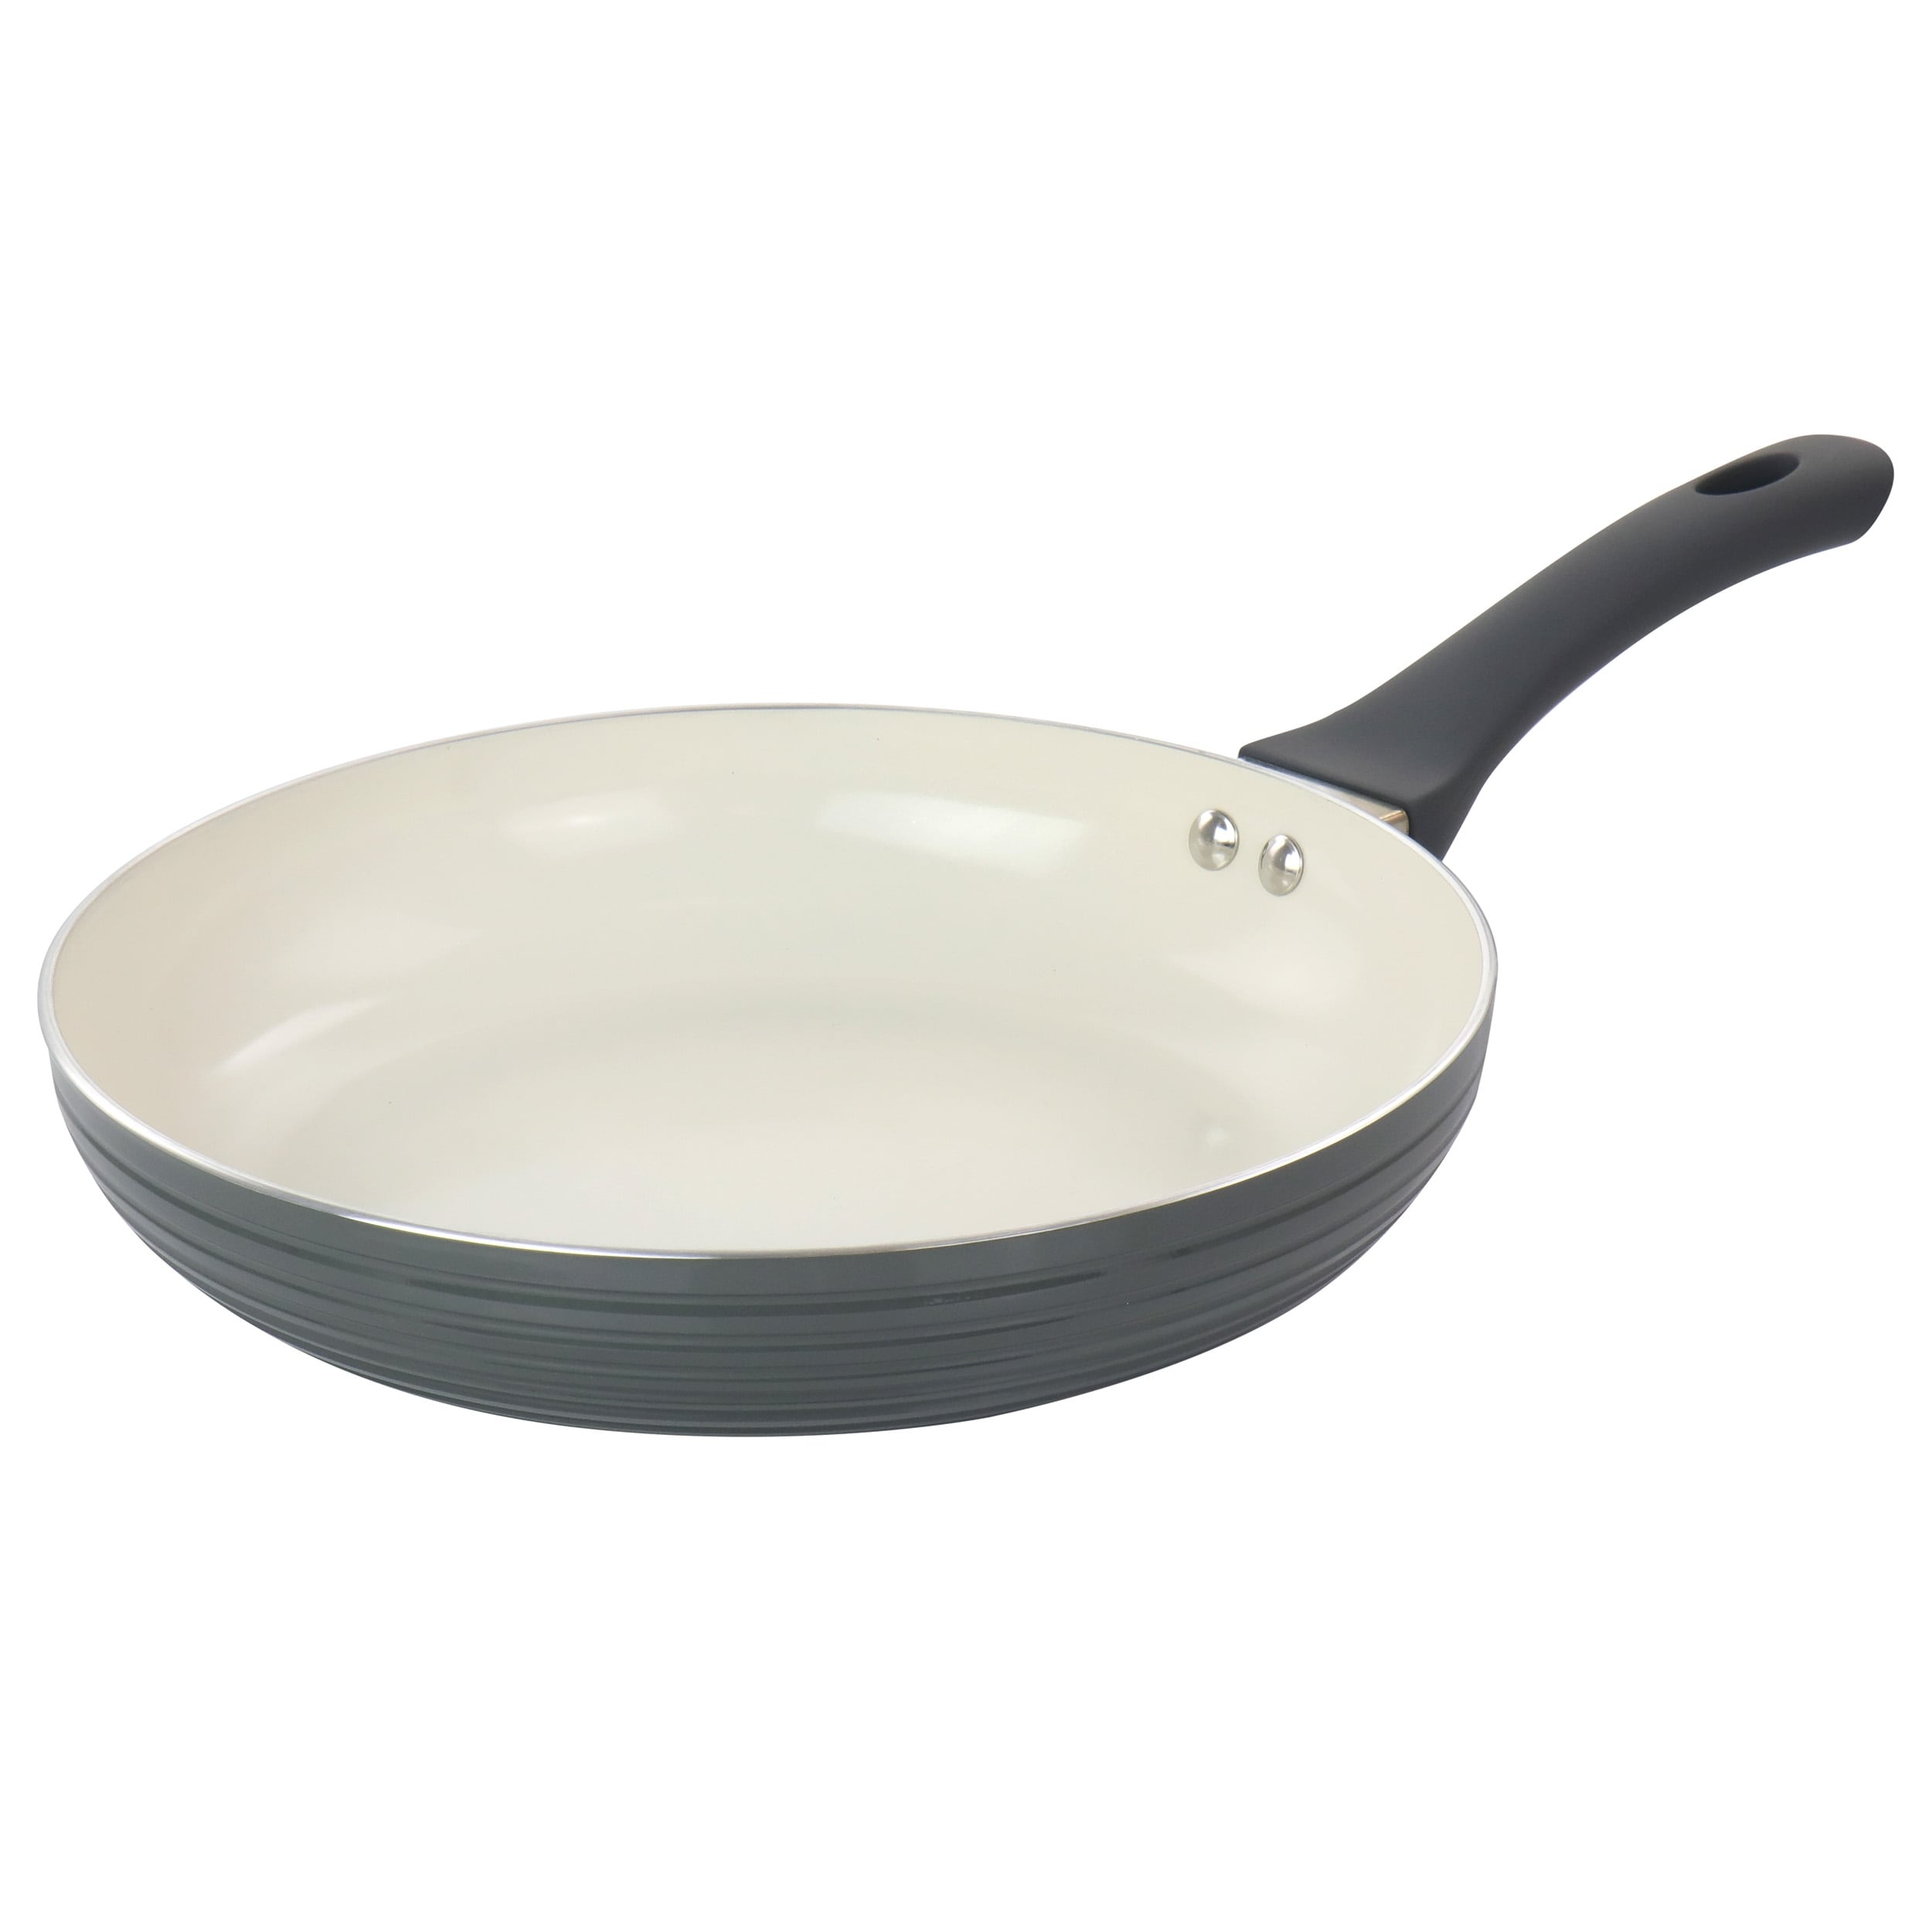 https://ak1.ostkcdn.com/images/products/is/images/direct/32bd94e10ed8efb4301503f30f2f4f25d60fad8a/Oster-Ridge-Valley-10-Inch-Aluminum-Nonstick-Frying-Pan-in-Grey.jpg